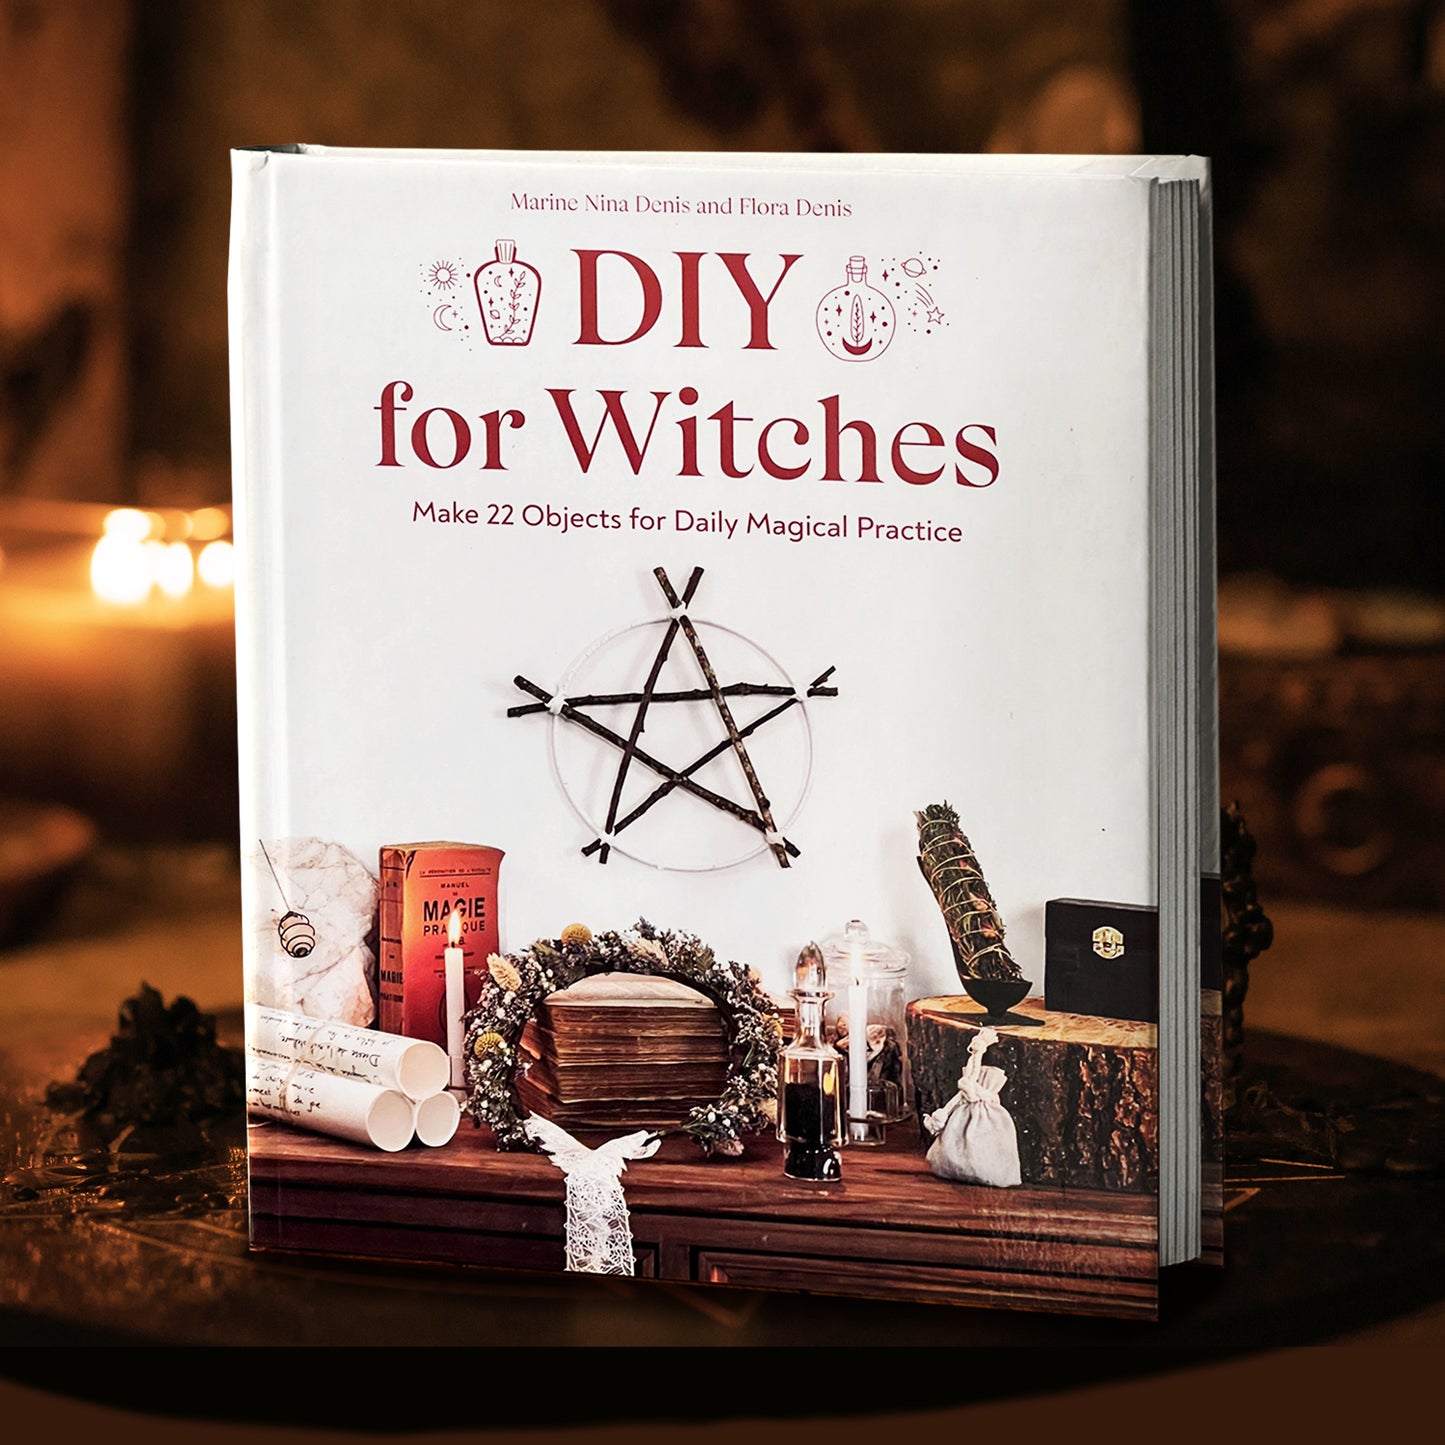 A white book on a circular tablet, with candles and spell ingredients in the background. On the cover is maroon text reading "DIY for witches." Under the text is a pentagram fashioned from twigs, hanging on a white background. Beneath the pentagram are various scrolls, books, candles, and other magical items, on a wooden cabinet.